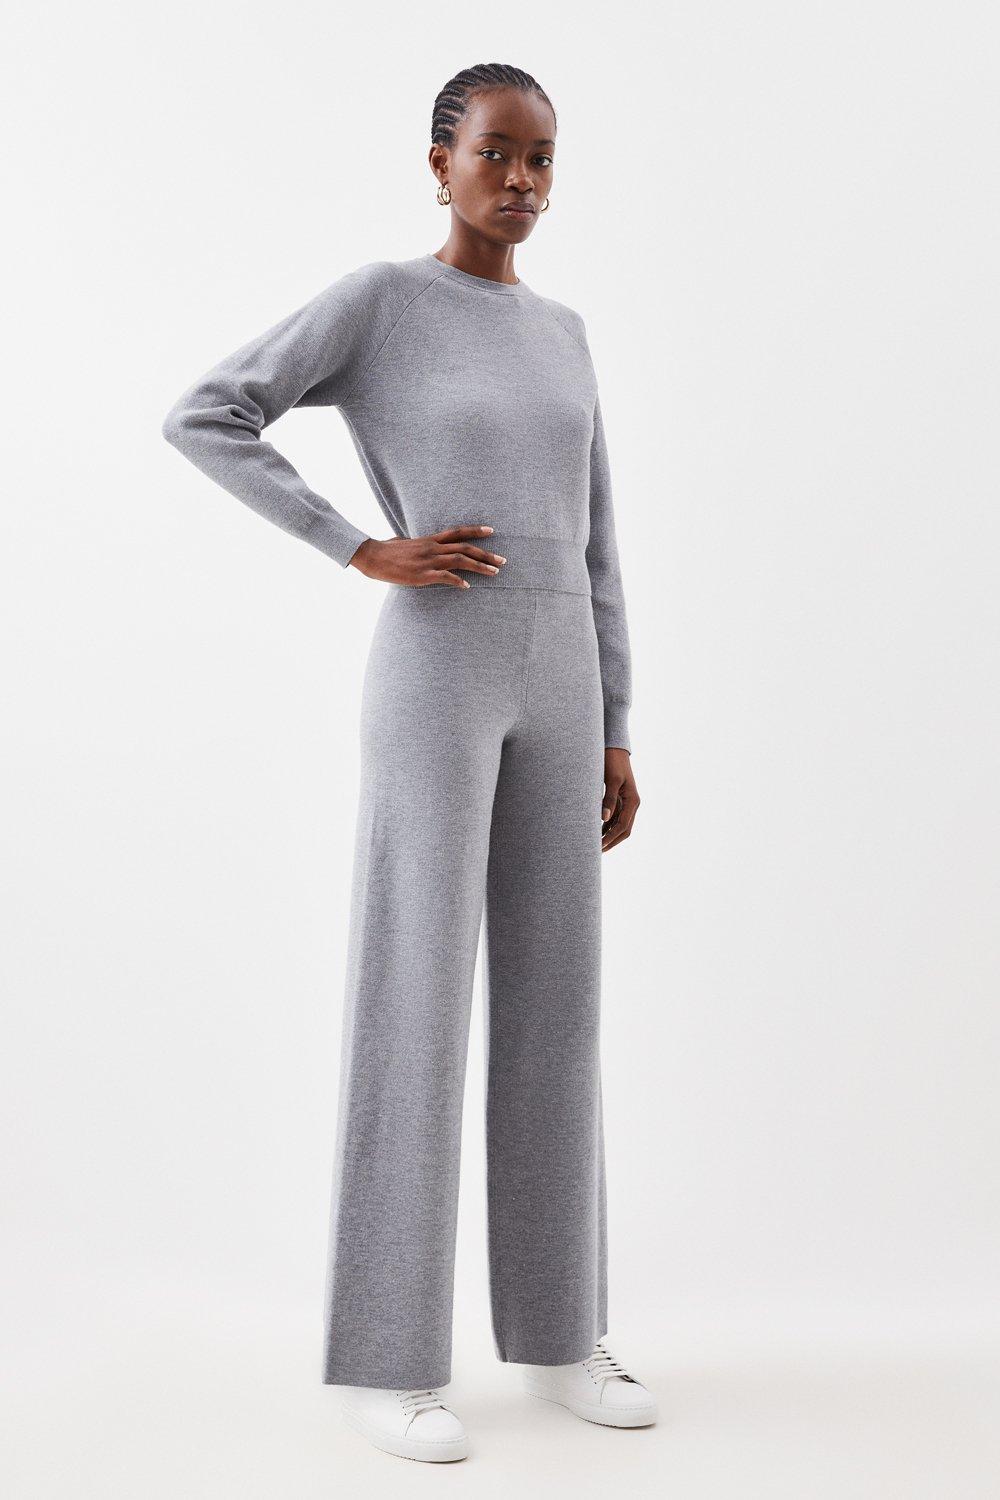 NEW Ted Baker Yadira Rib-Knit Trousers in Gray - Size 3 US 8 #P1469 | eBay